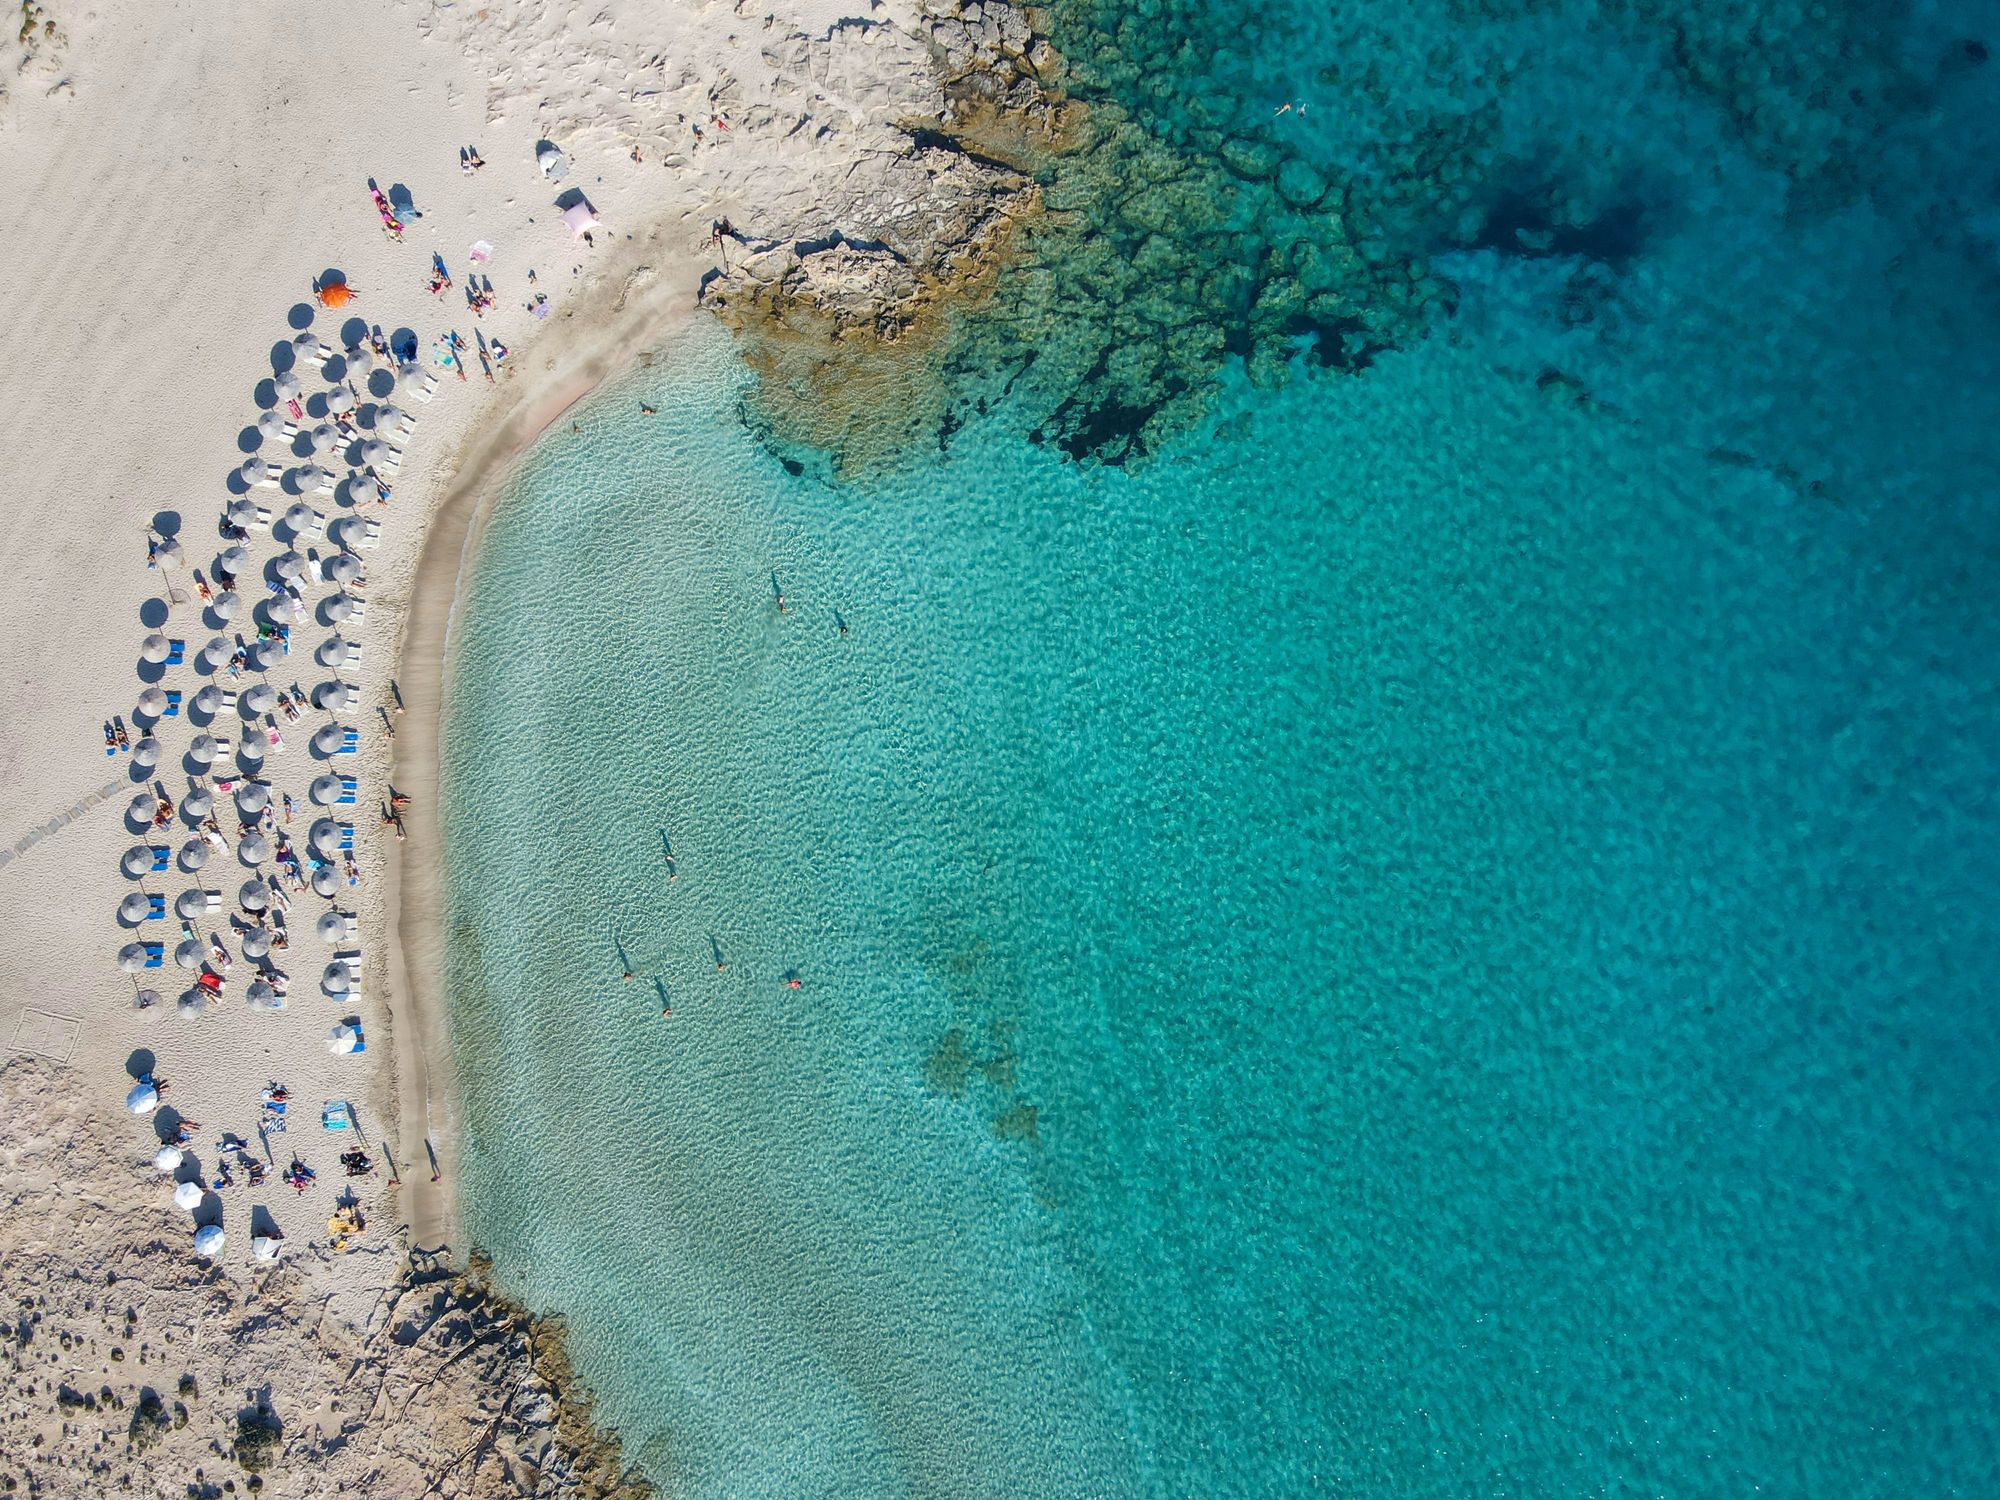 Athens' Summer Secrets in Secluded Islands